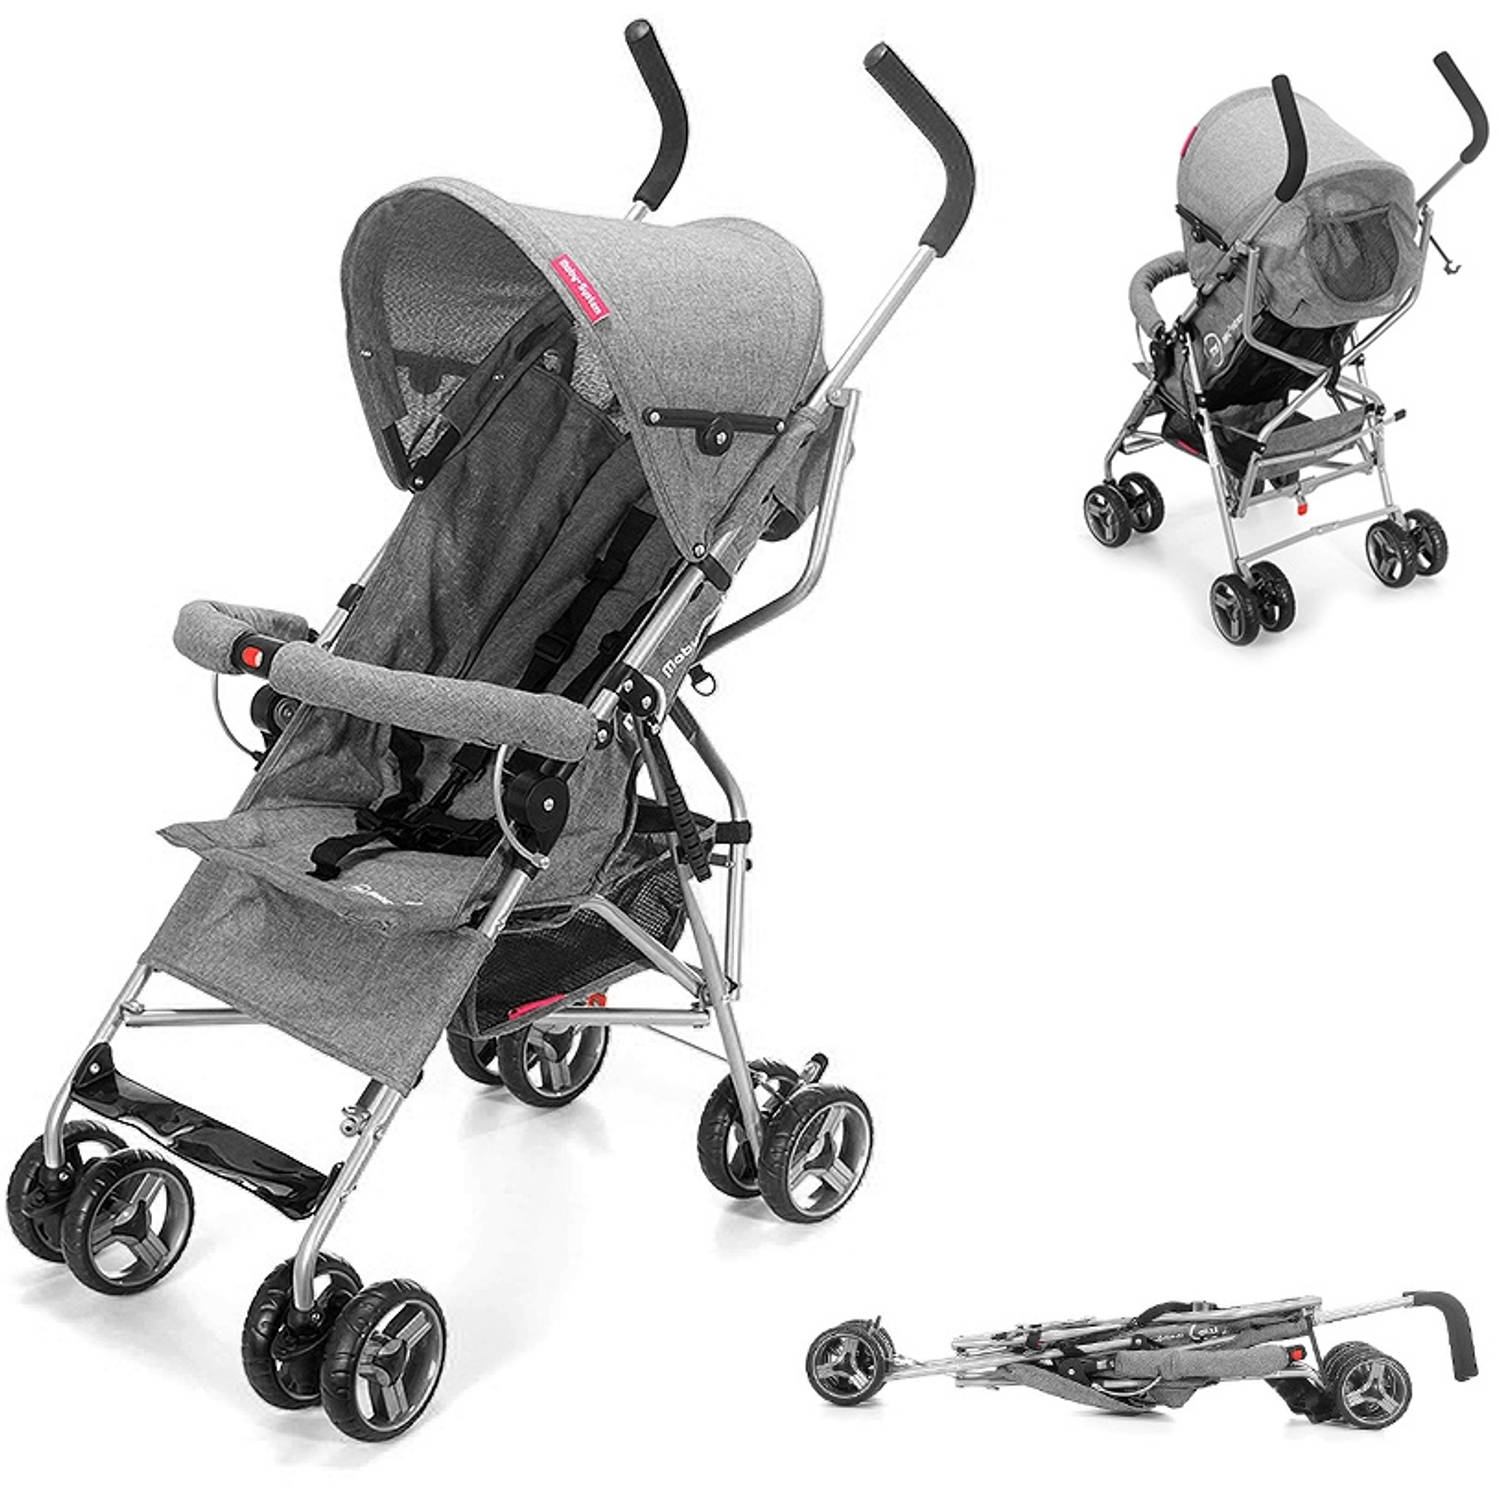 Moby-SystemPlooibuggy Barton buggy